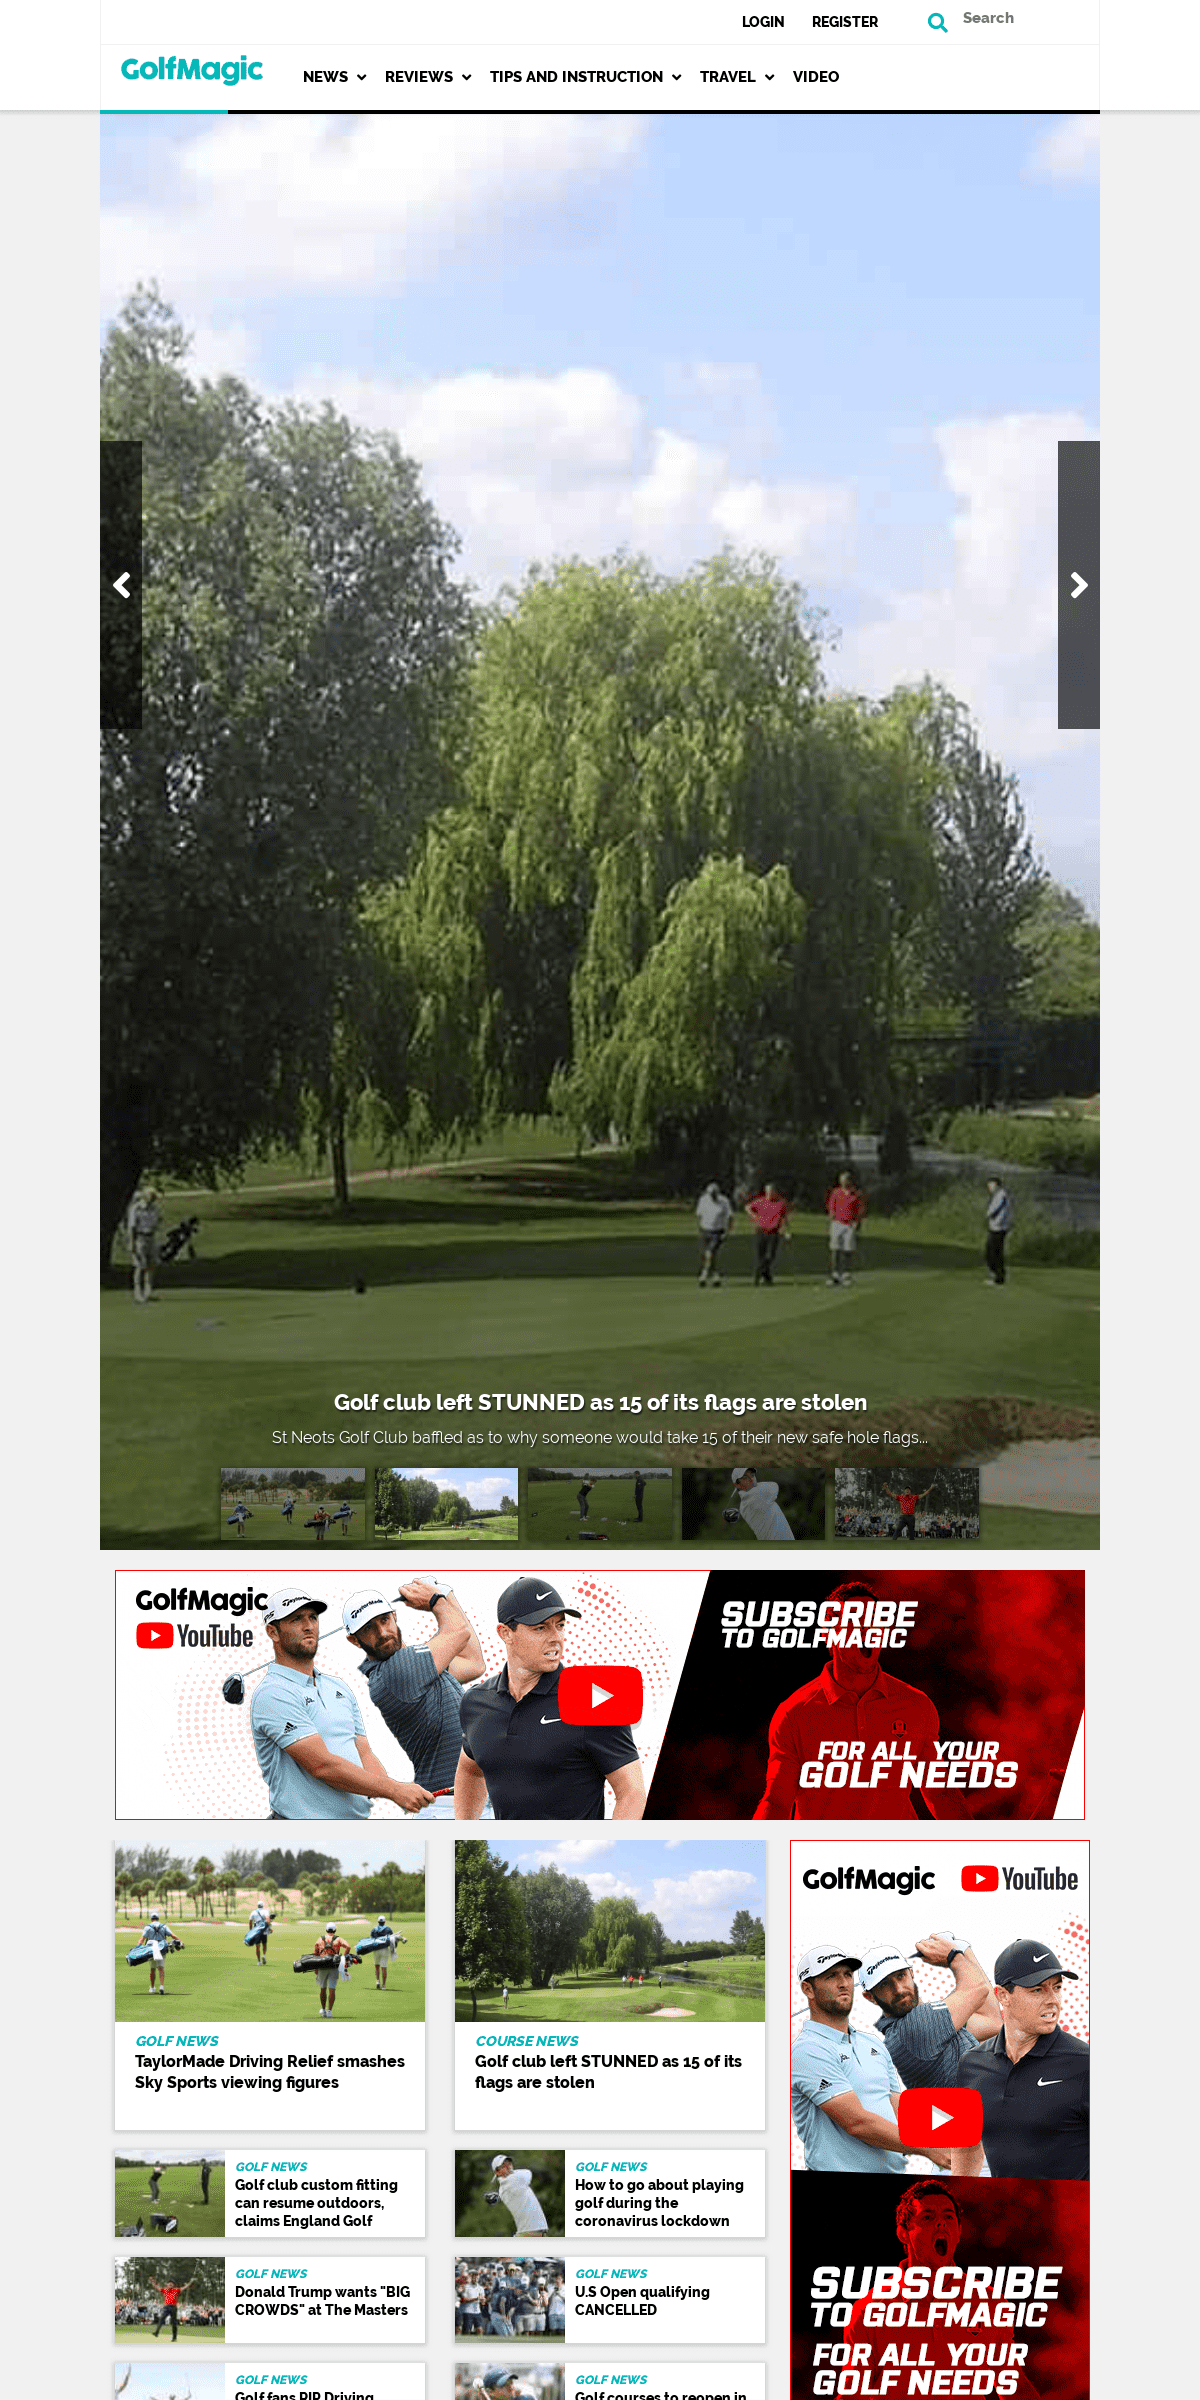 GolfMagic - Europe's No.1 golf equipment, reviews and ratings resource - GolfMagic